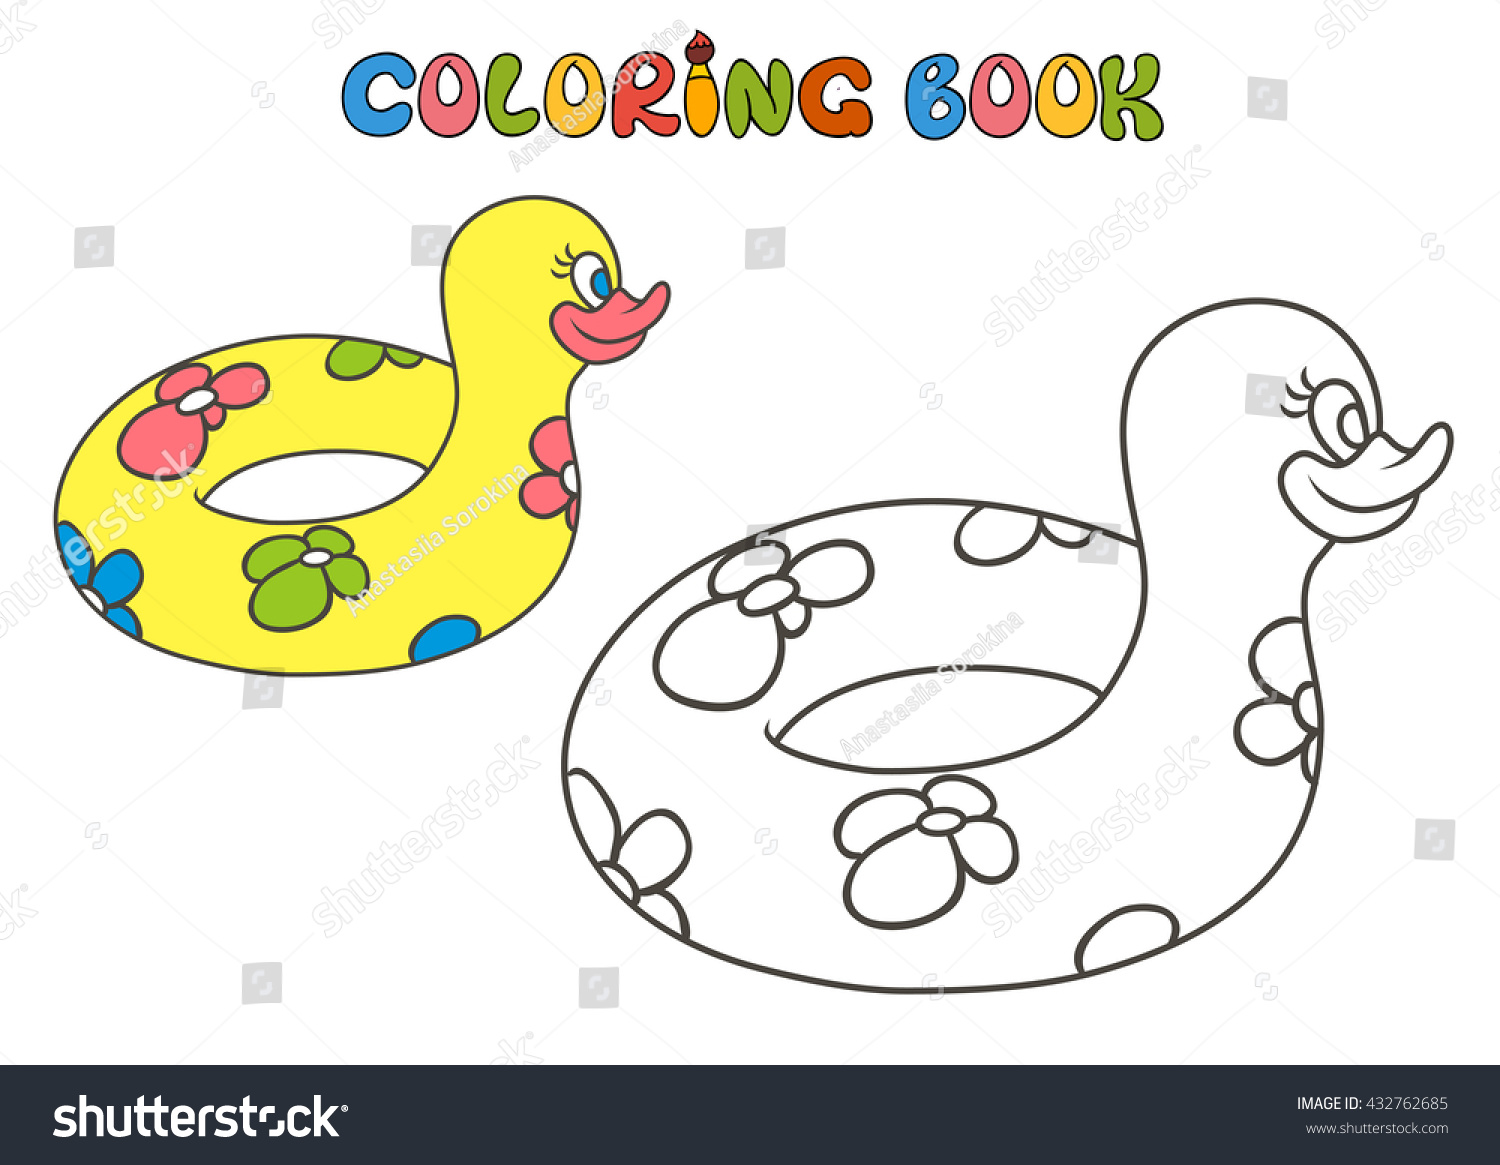 Coloring book vector illustration rubber duck stock vector royalty free